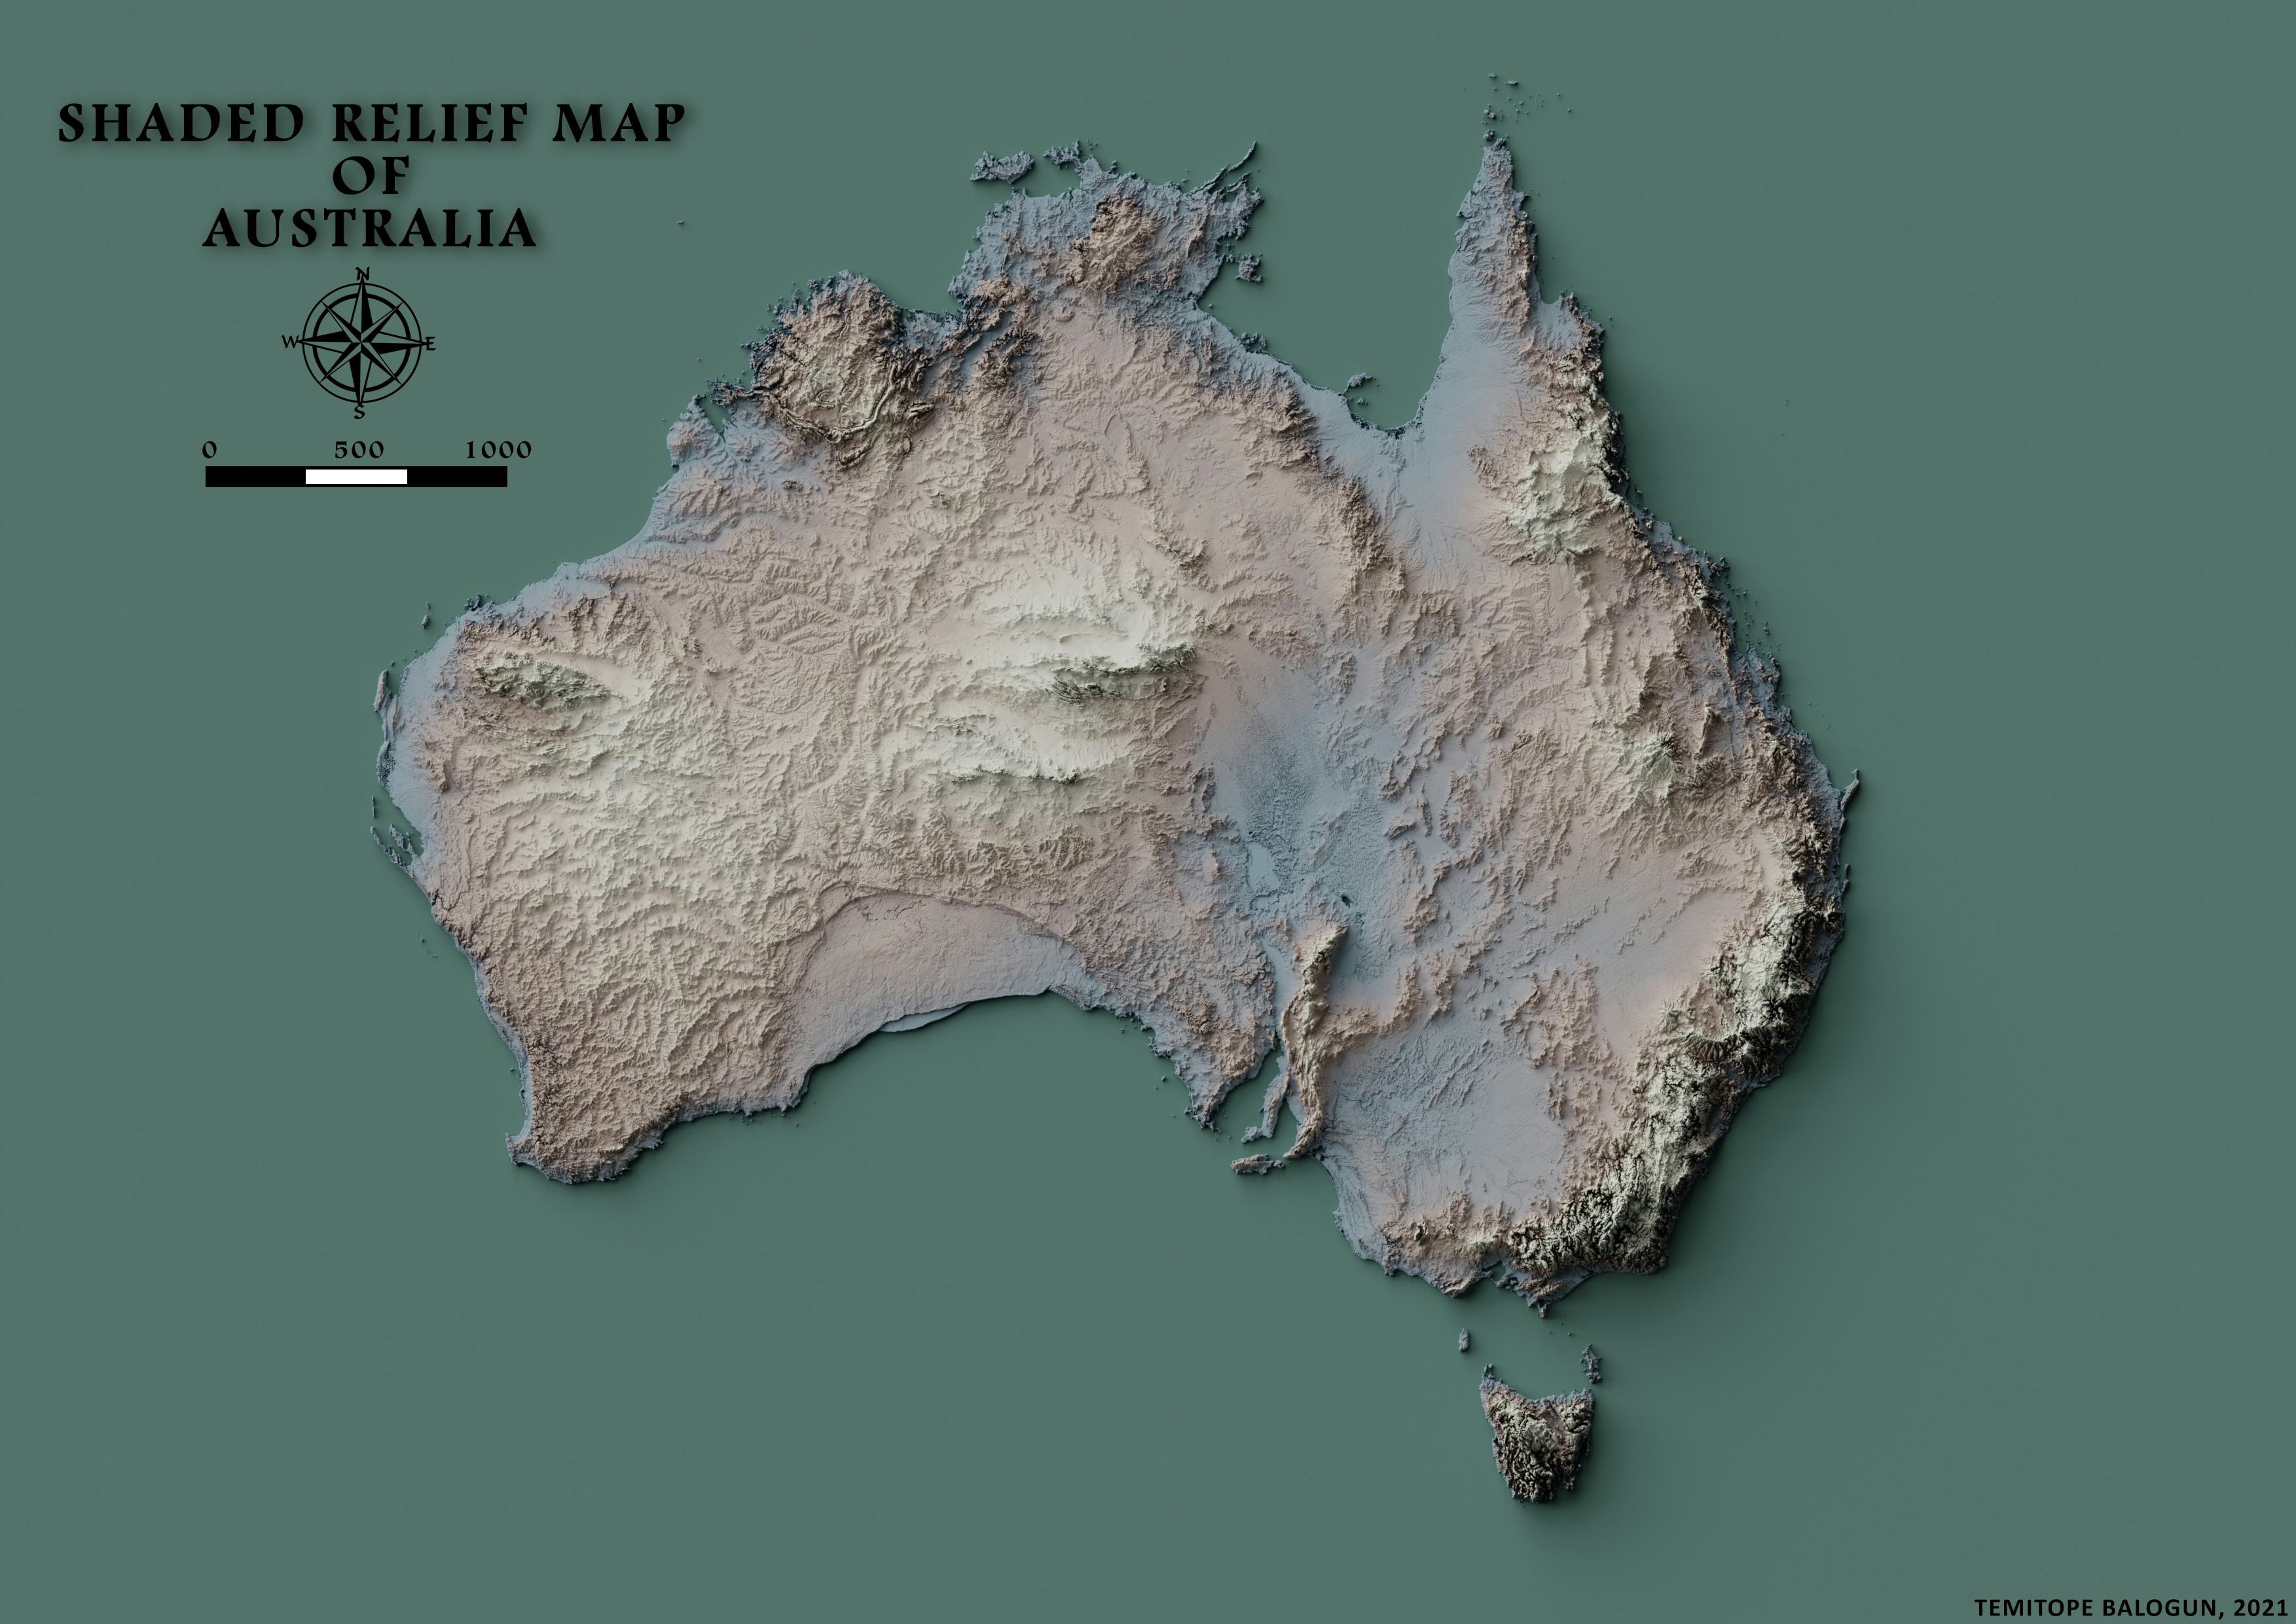 Shaded relief map of Australia